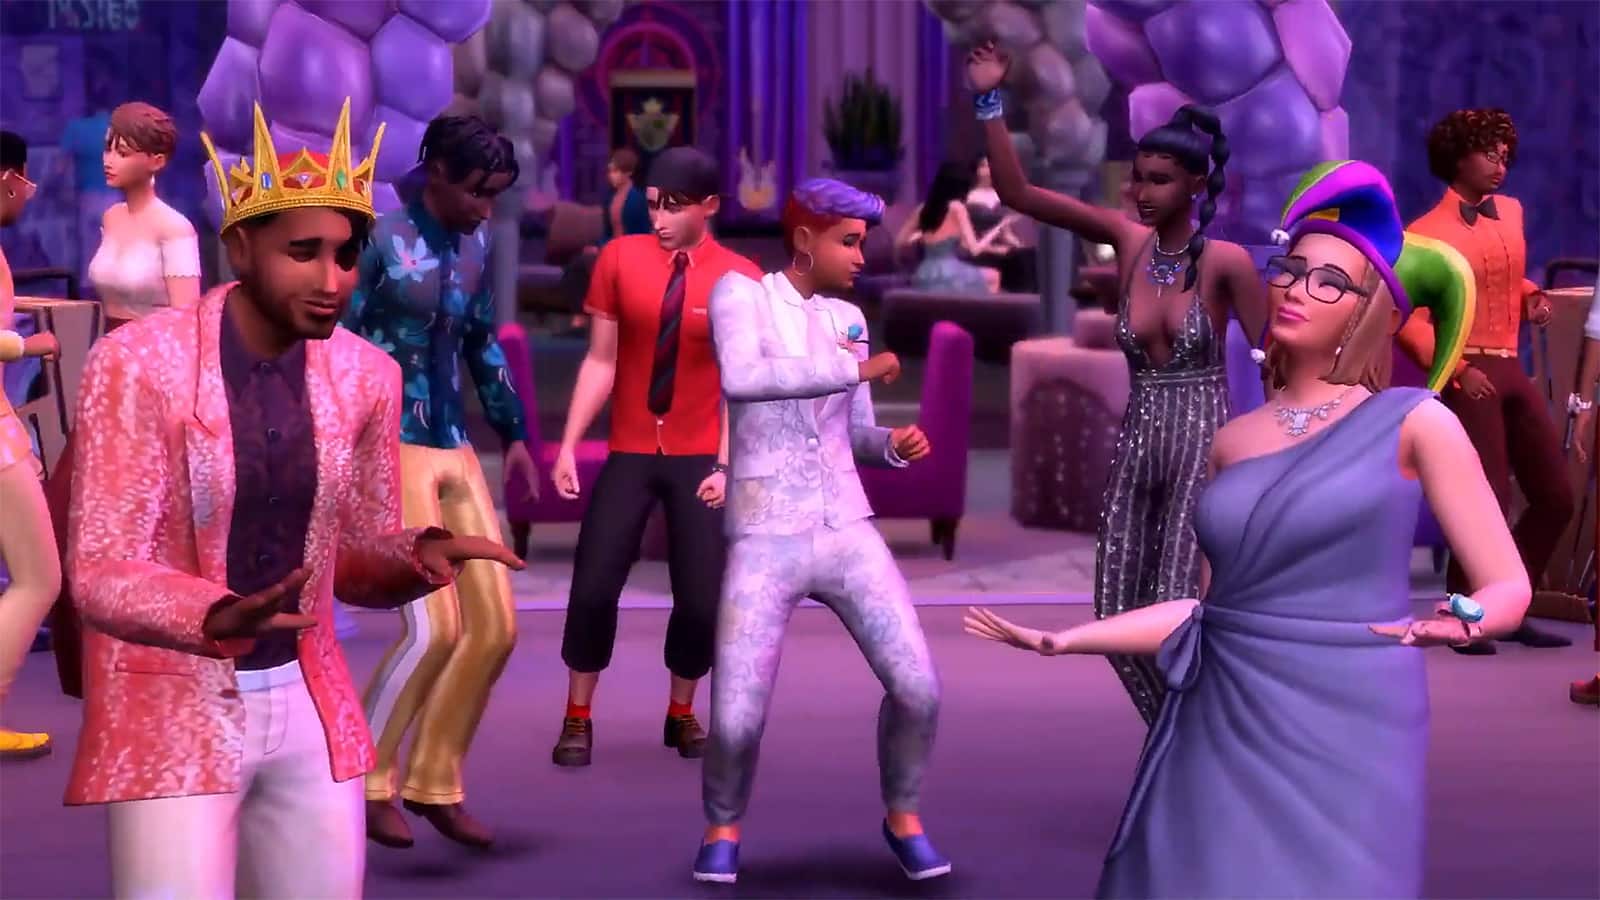 Sims at a prom in The Sims 4 High School Years